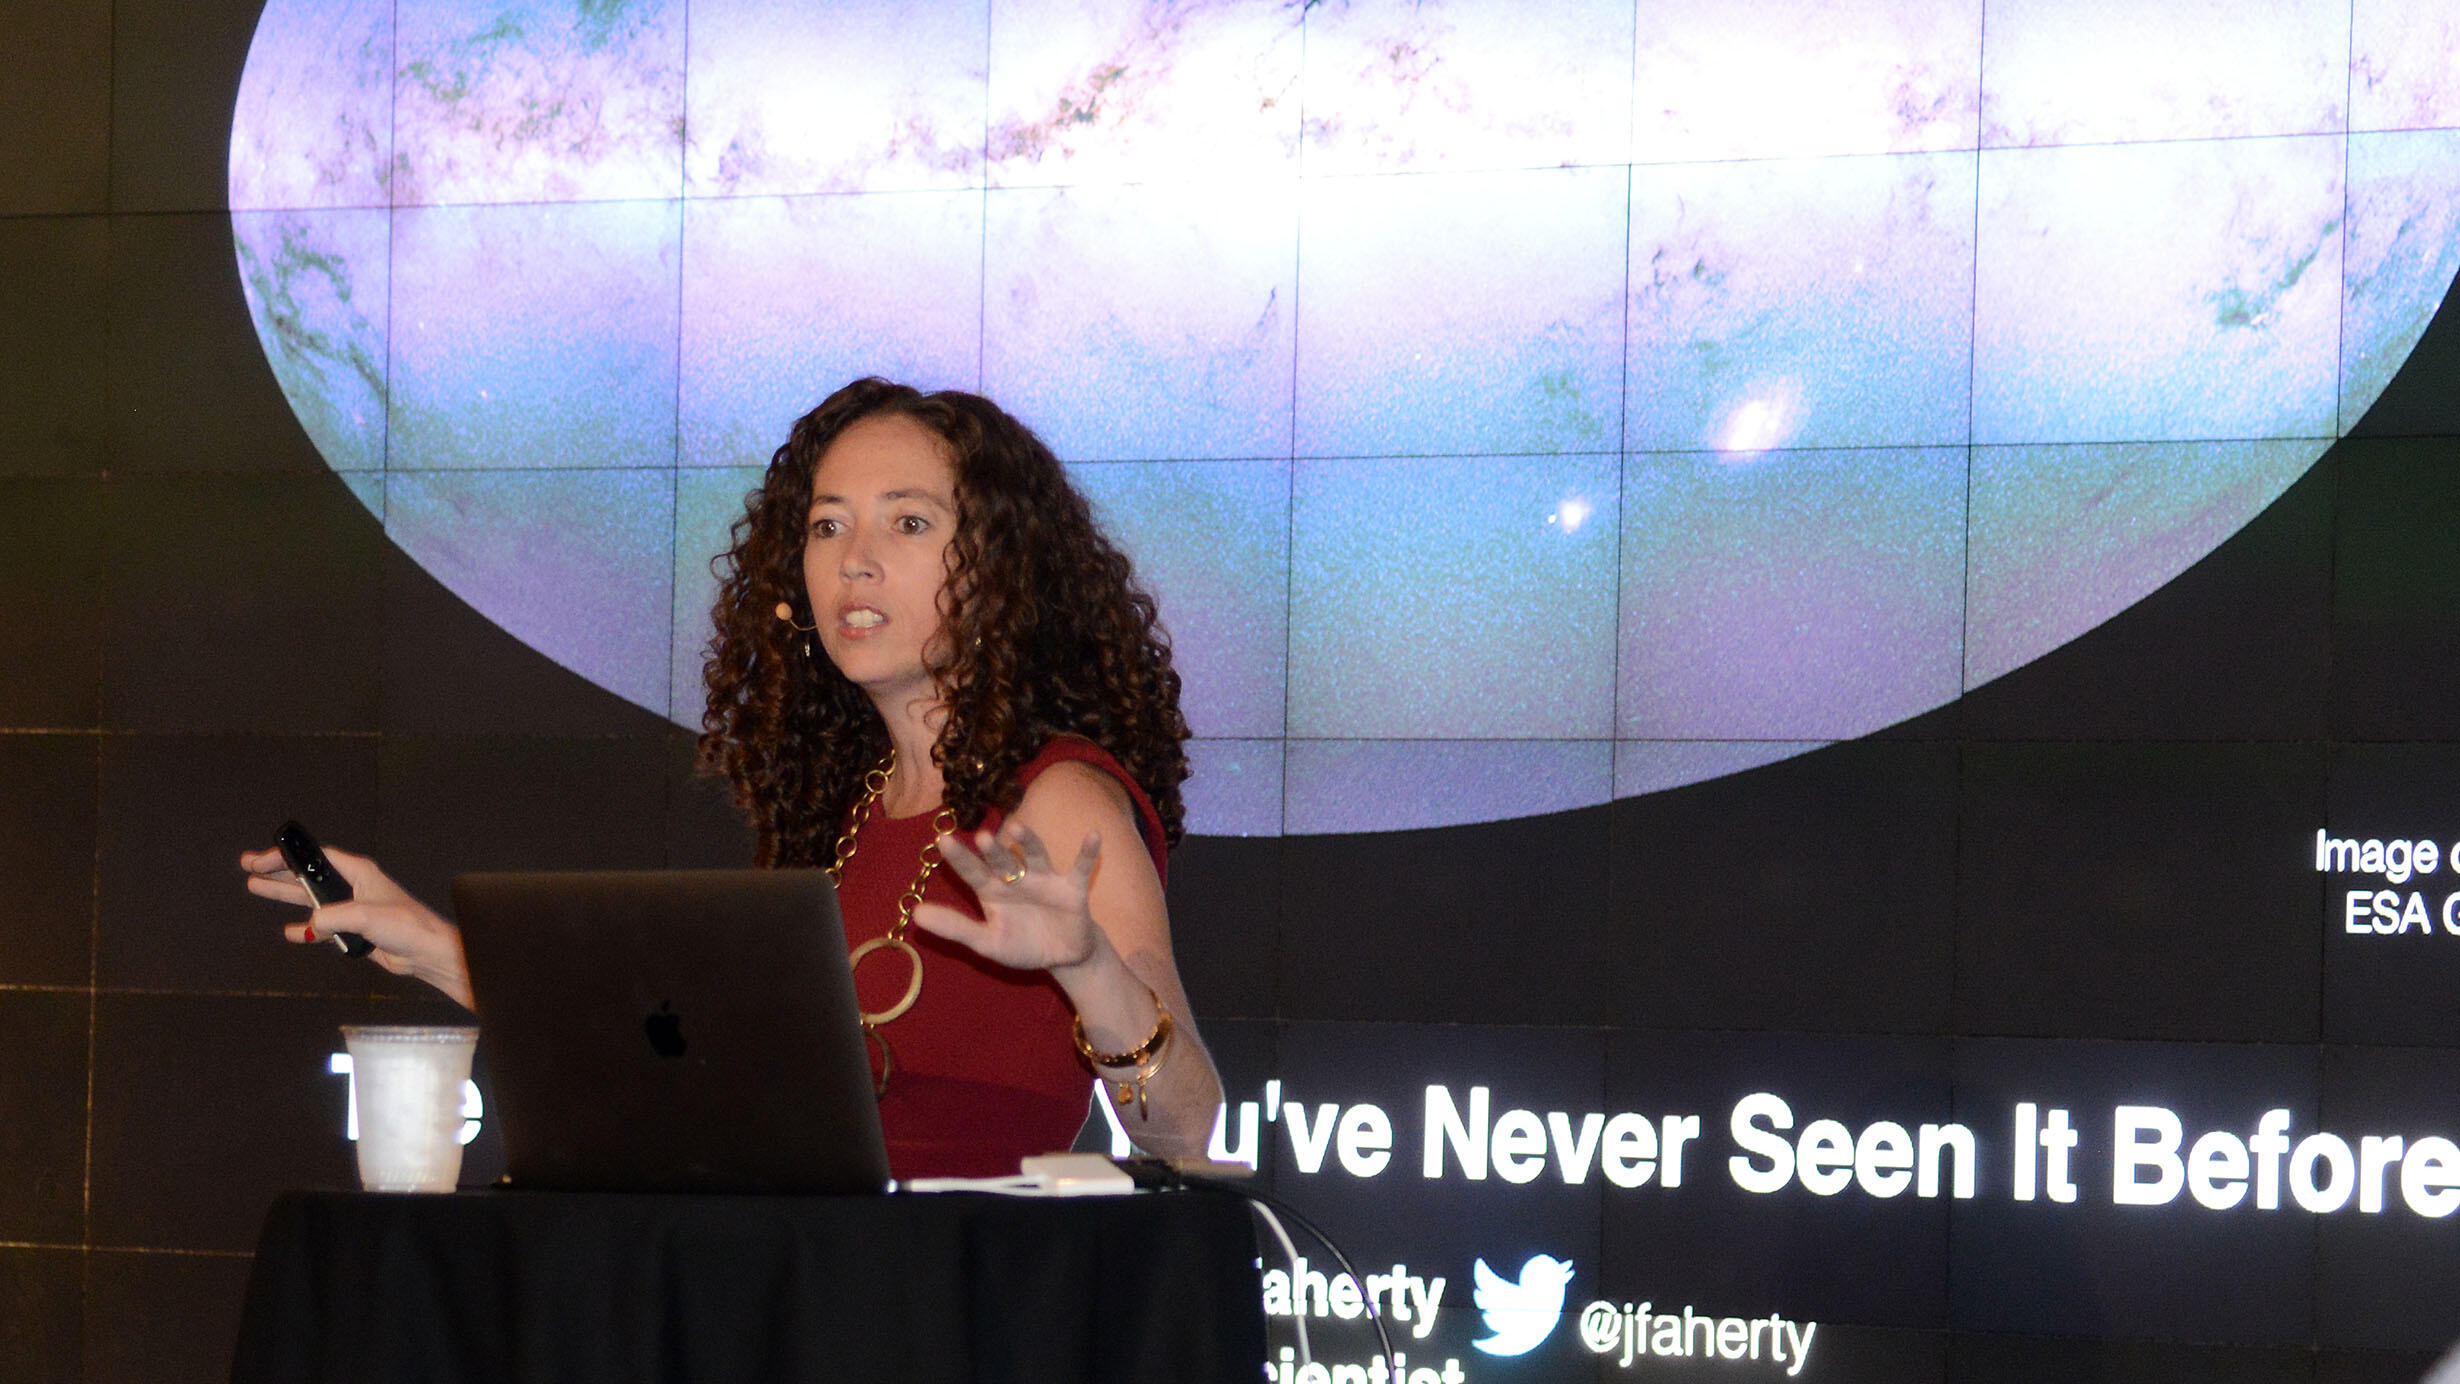 Jackie Faherty, Senior Scientist in the AMNH Astrophysics Department, stands at a podium giving a talk.